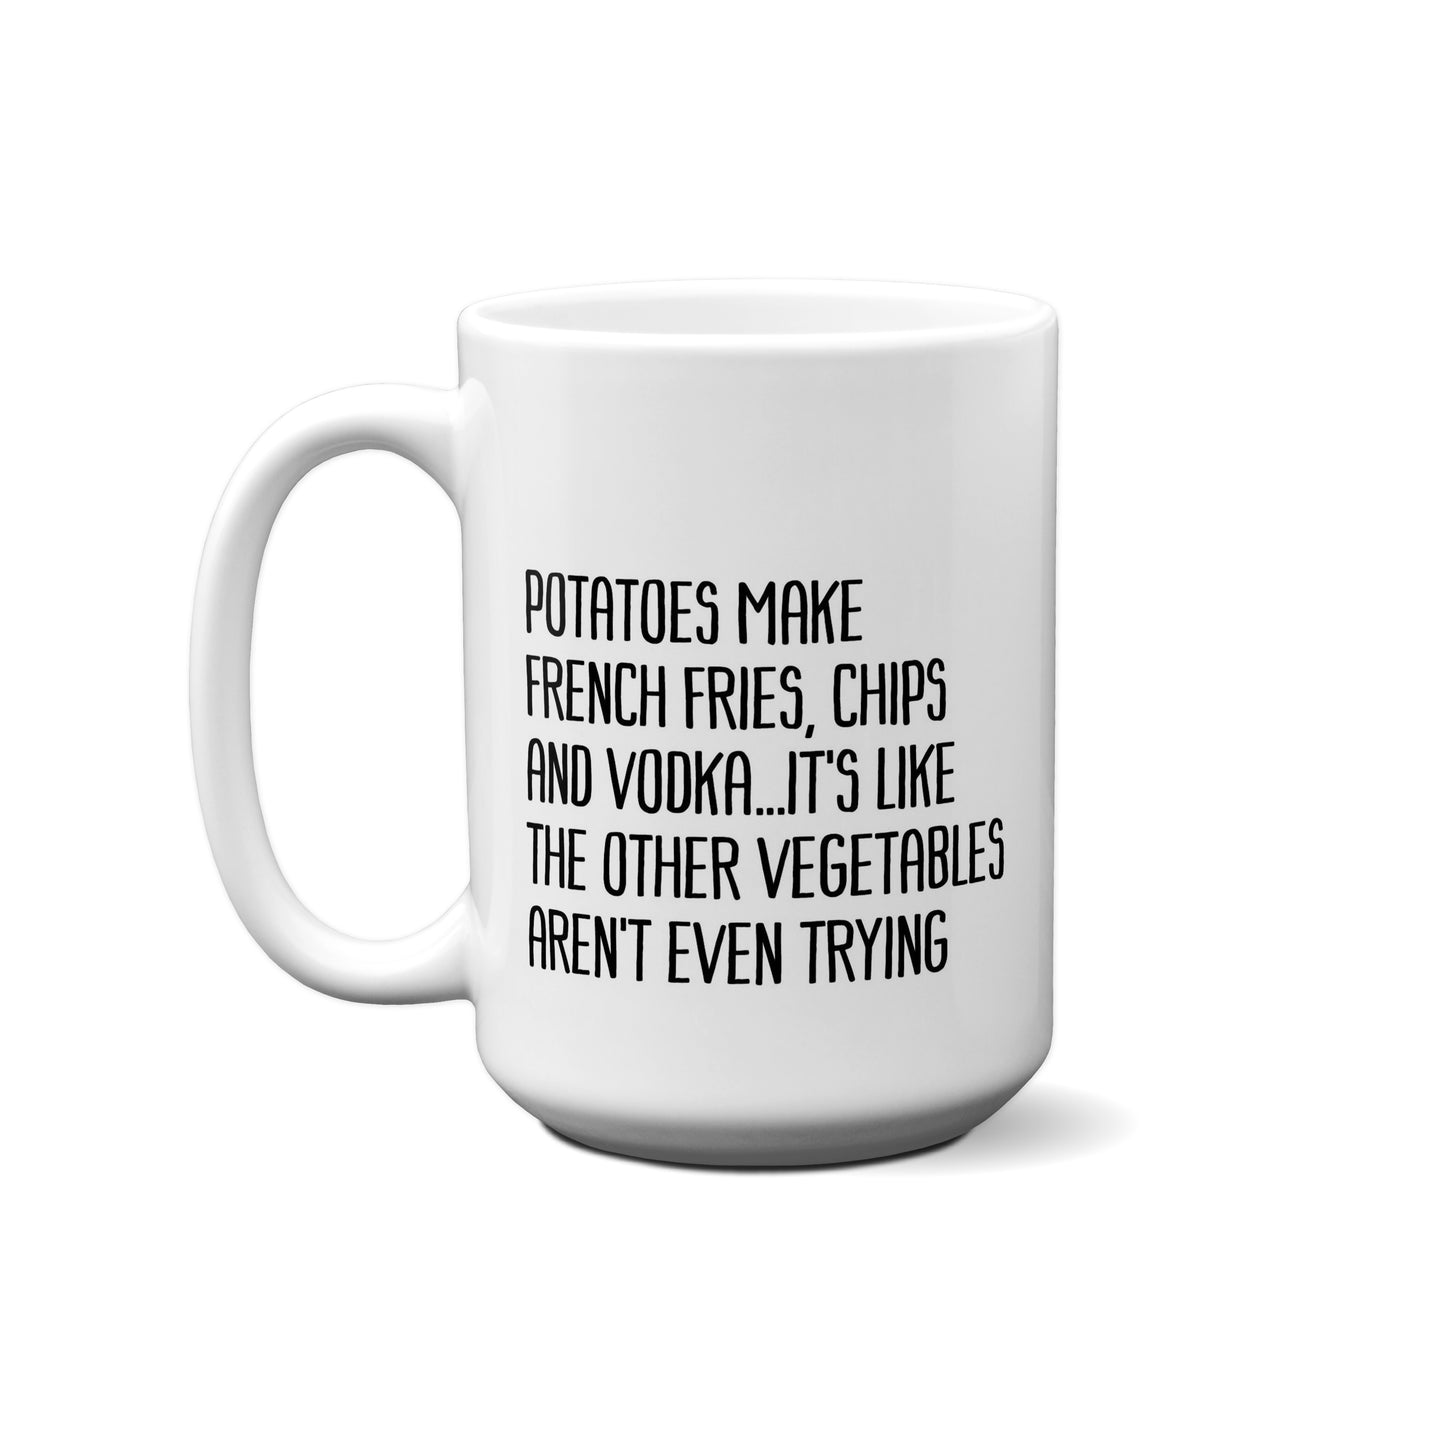 Potatoes Make French Fries, Chips And Vod.... Quote Mug